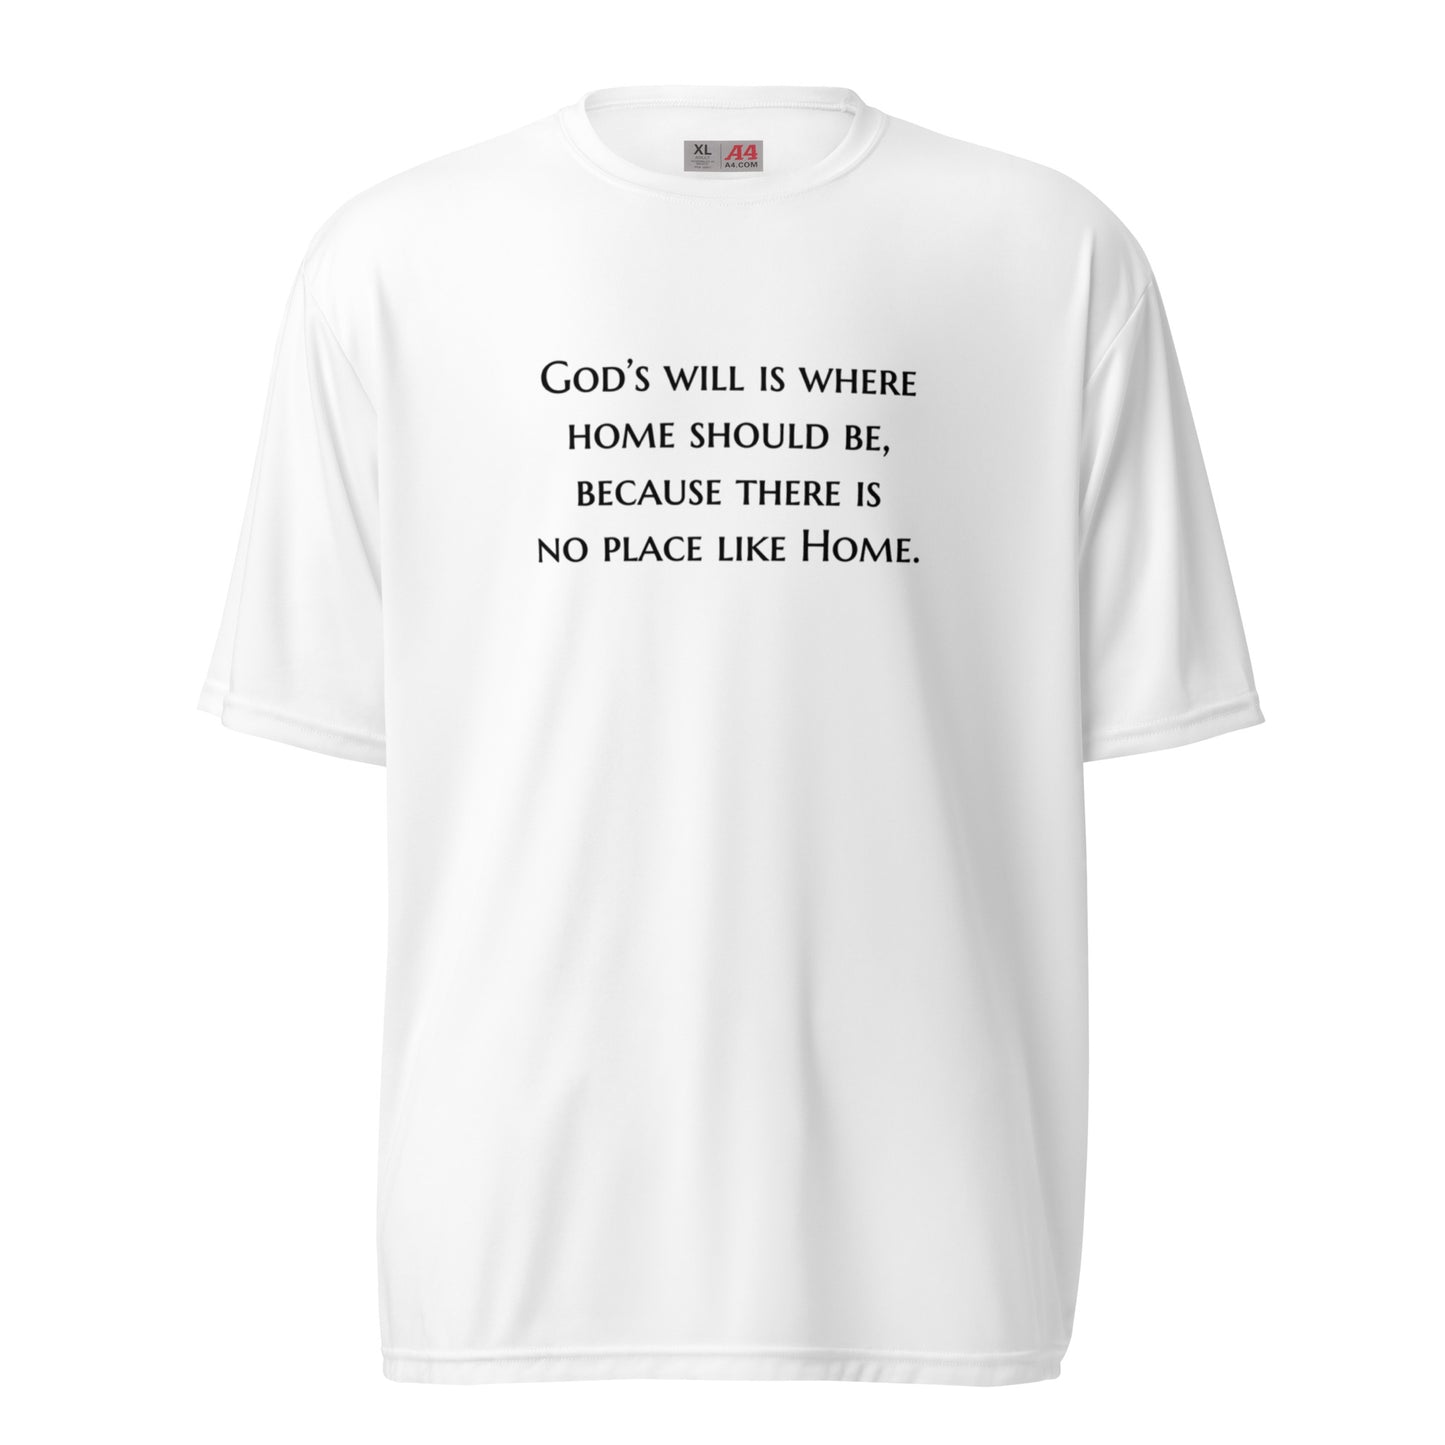 God's Will is Where Home Should Be unisex performance crew neck t-shirt - Black Print